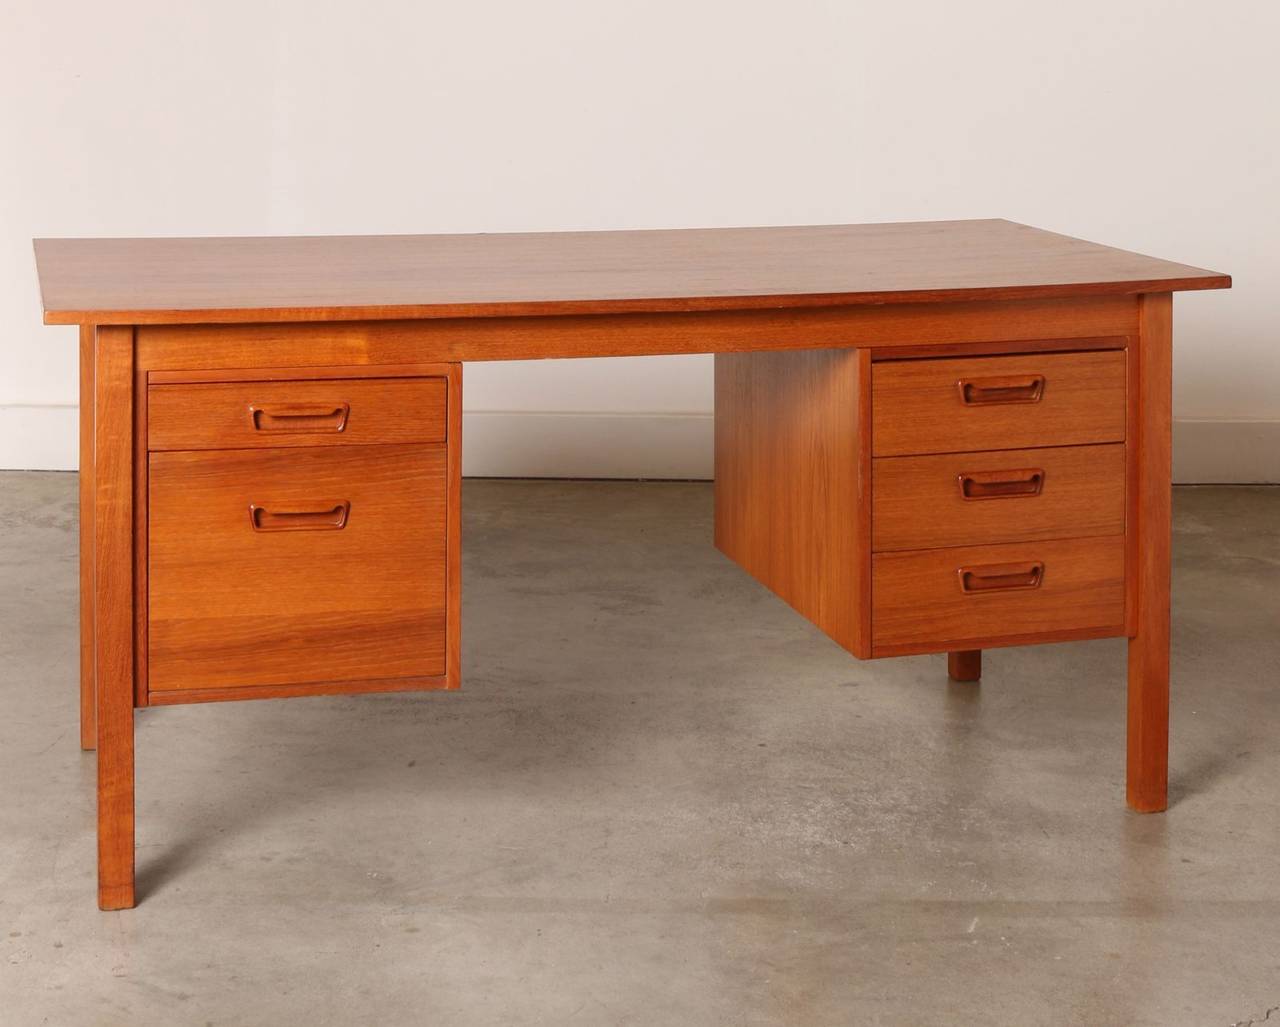 Float this substantial desk centrally in a room or position it near a corner or wall. This two-sided Danish Modern teak partners desk features five drawers (one of which holds file folders) on one side and bookshelves on the other. 

The drawers